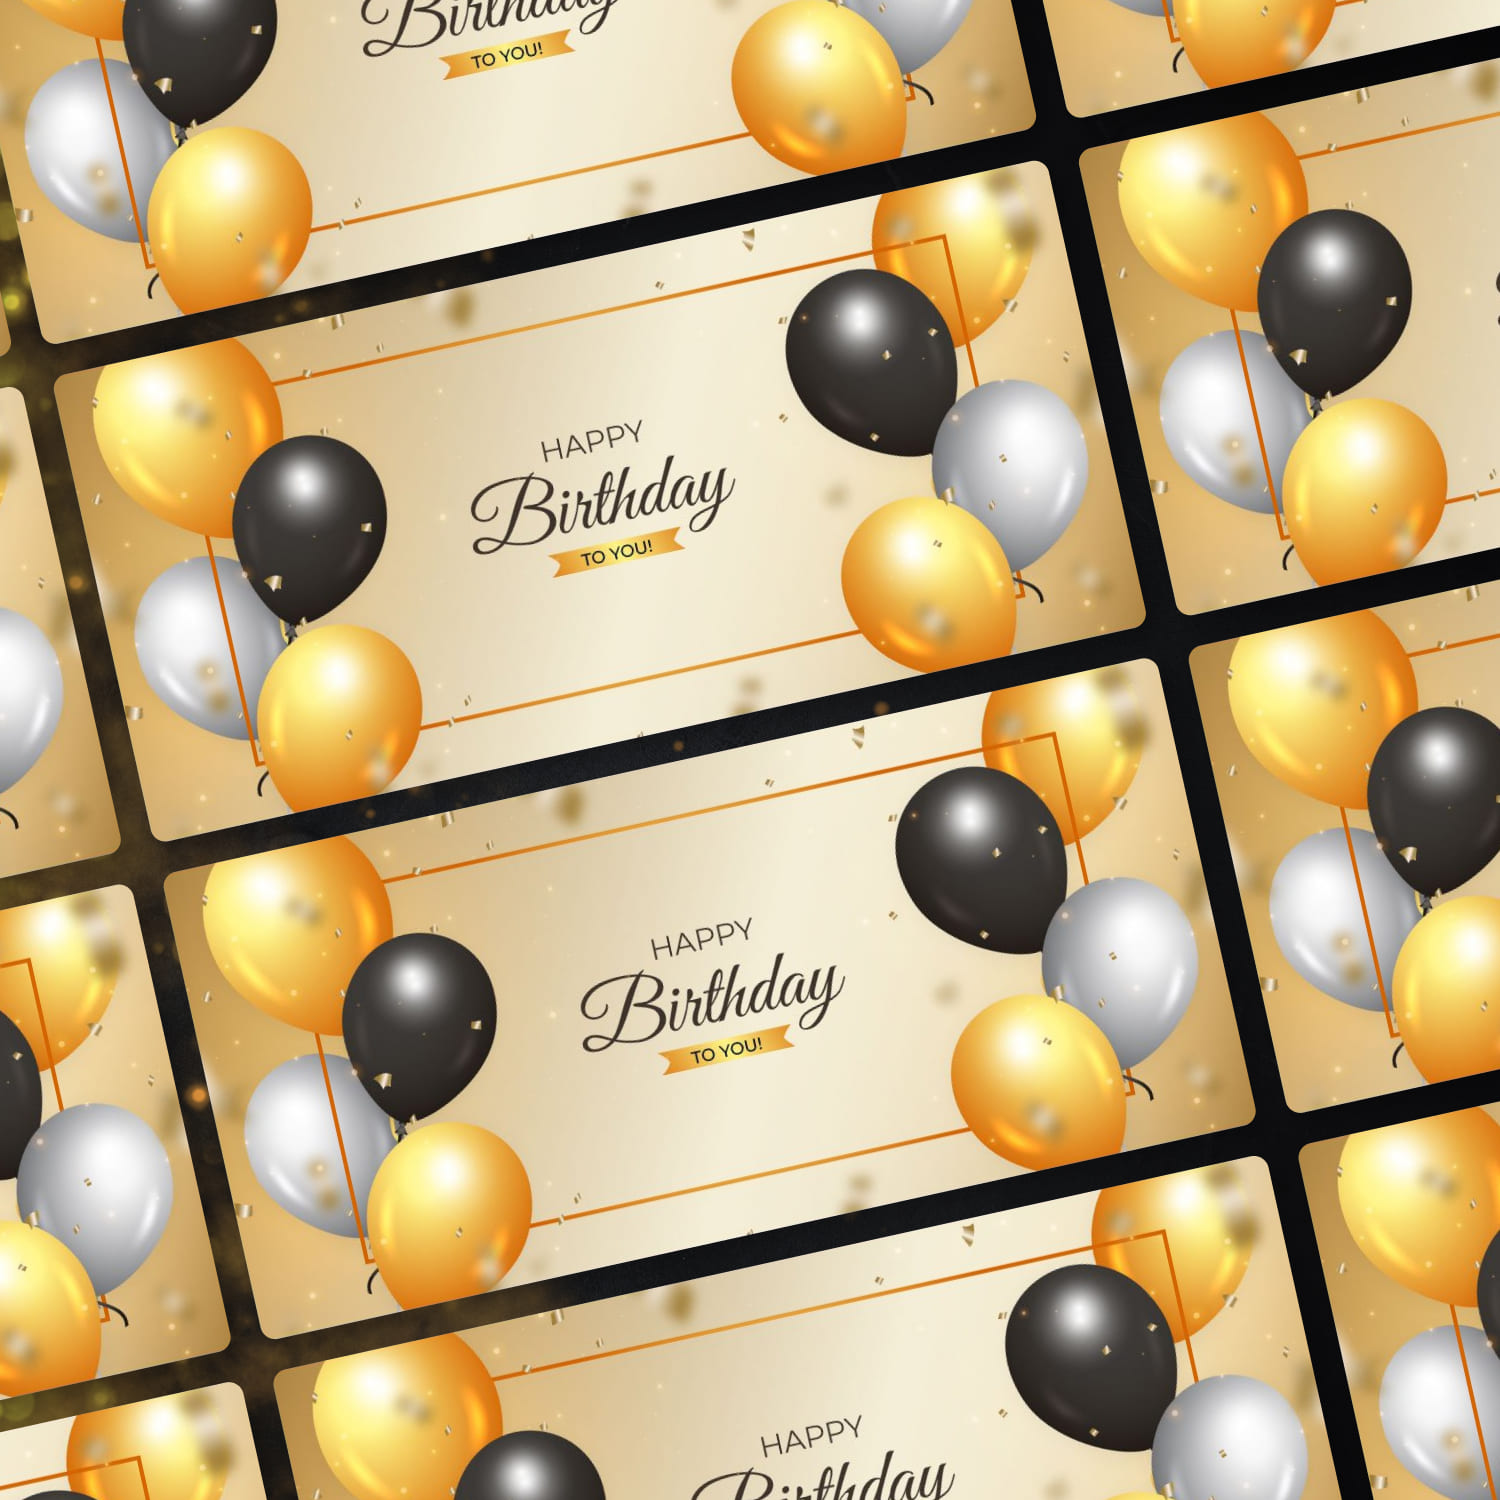 Birthday Banner with Golden Confetti cover.